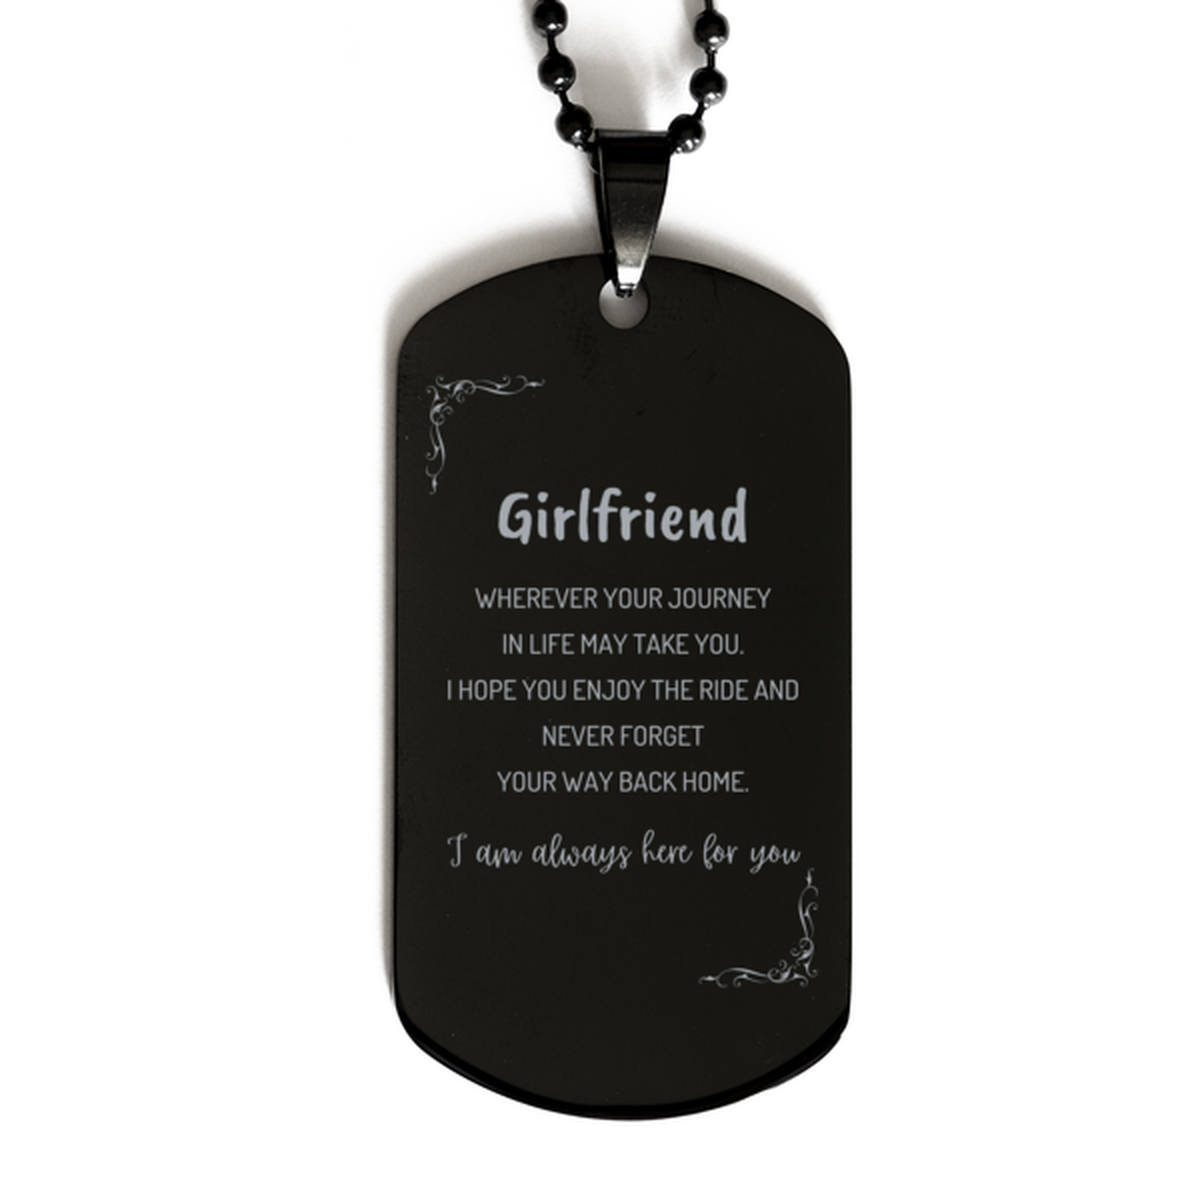 Girlfriend wherever your journey in life may take you, I am always here for you Girlfriend Black Dog Tag, Awesome Christmas Gifts For Girlfriend, Girlfriend Birthday Gifts for Men Women Family Loved One